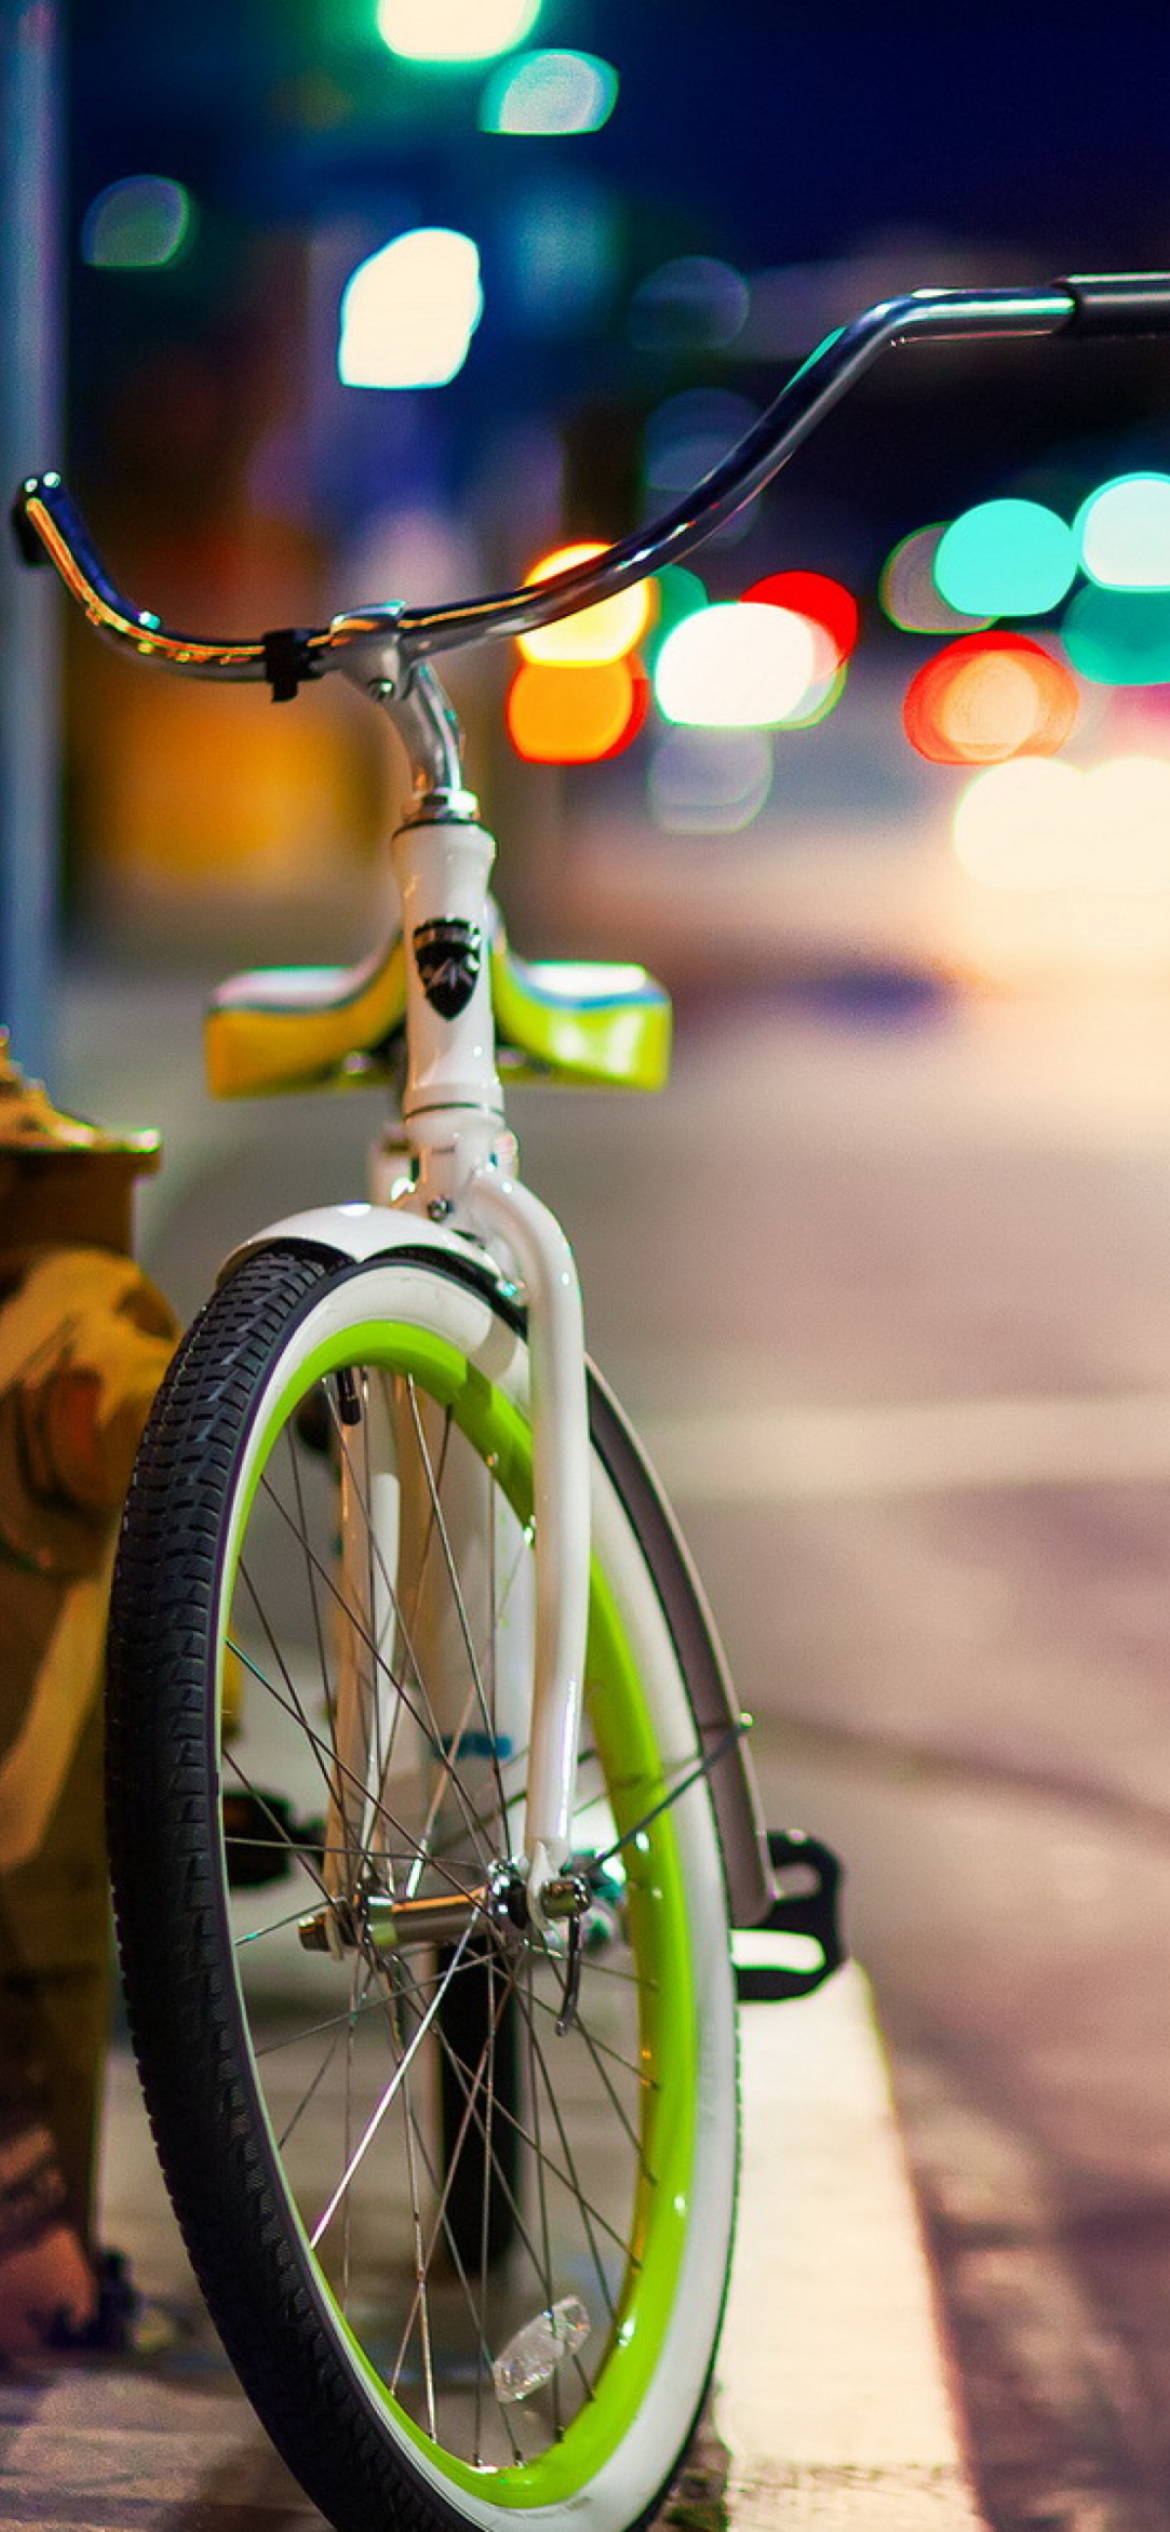 Das Green Bicycle In City Lights Wallpaper 1170x2532